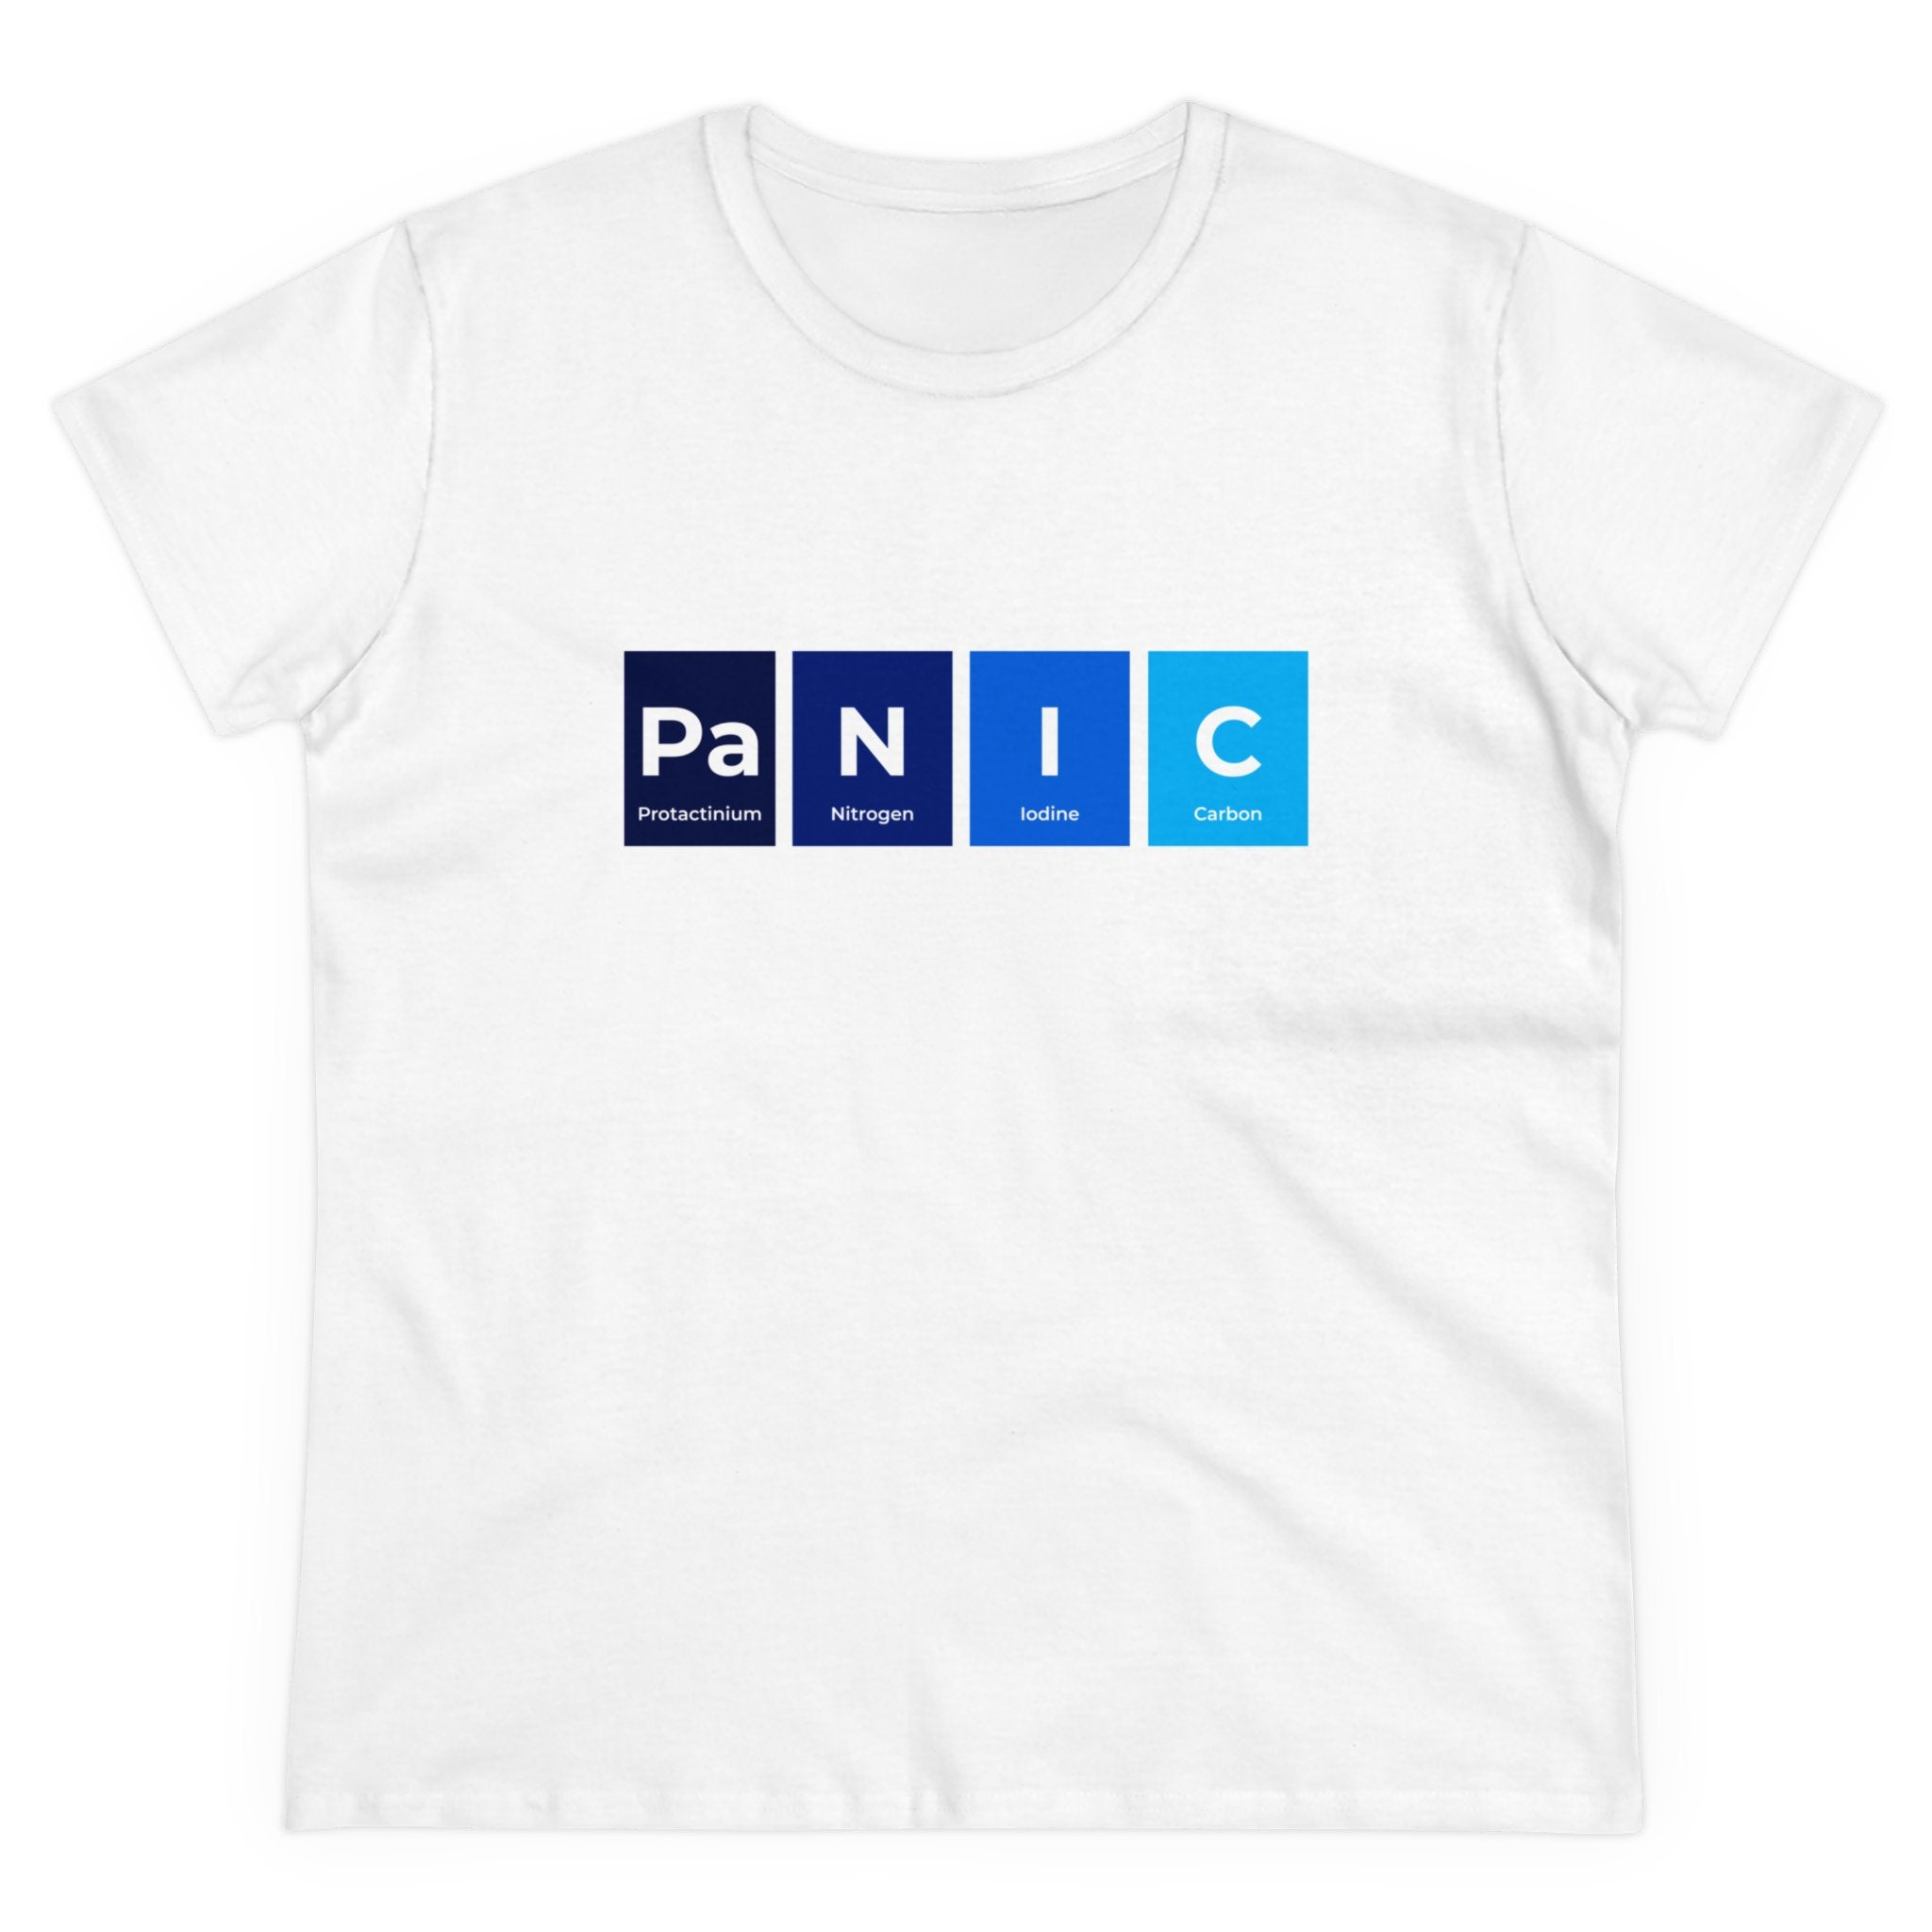 A white Pa-N-I-C - Women's Tee featuring "PANIC" spelled out using elements from the periodic table: Protactinium (Pa), Nitrogen (N), Iodine (I), and Carbon (C), printed in blue and black boxes. Stay comfy while showcasing your love for trendy designs!